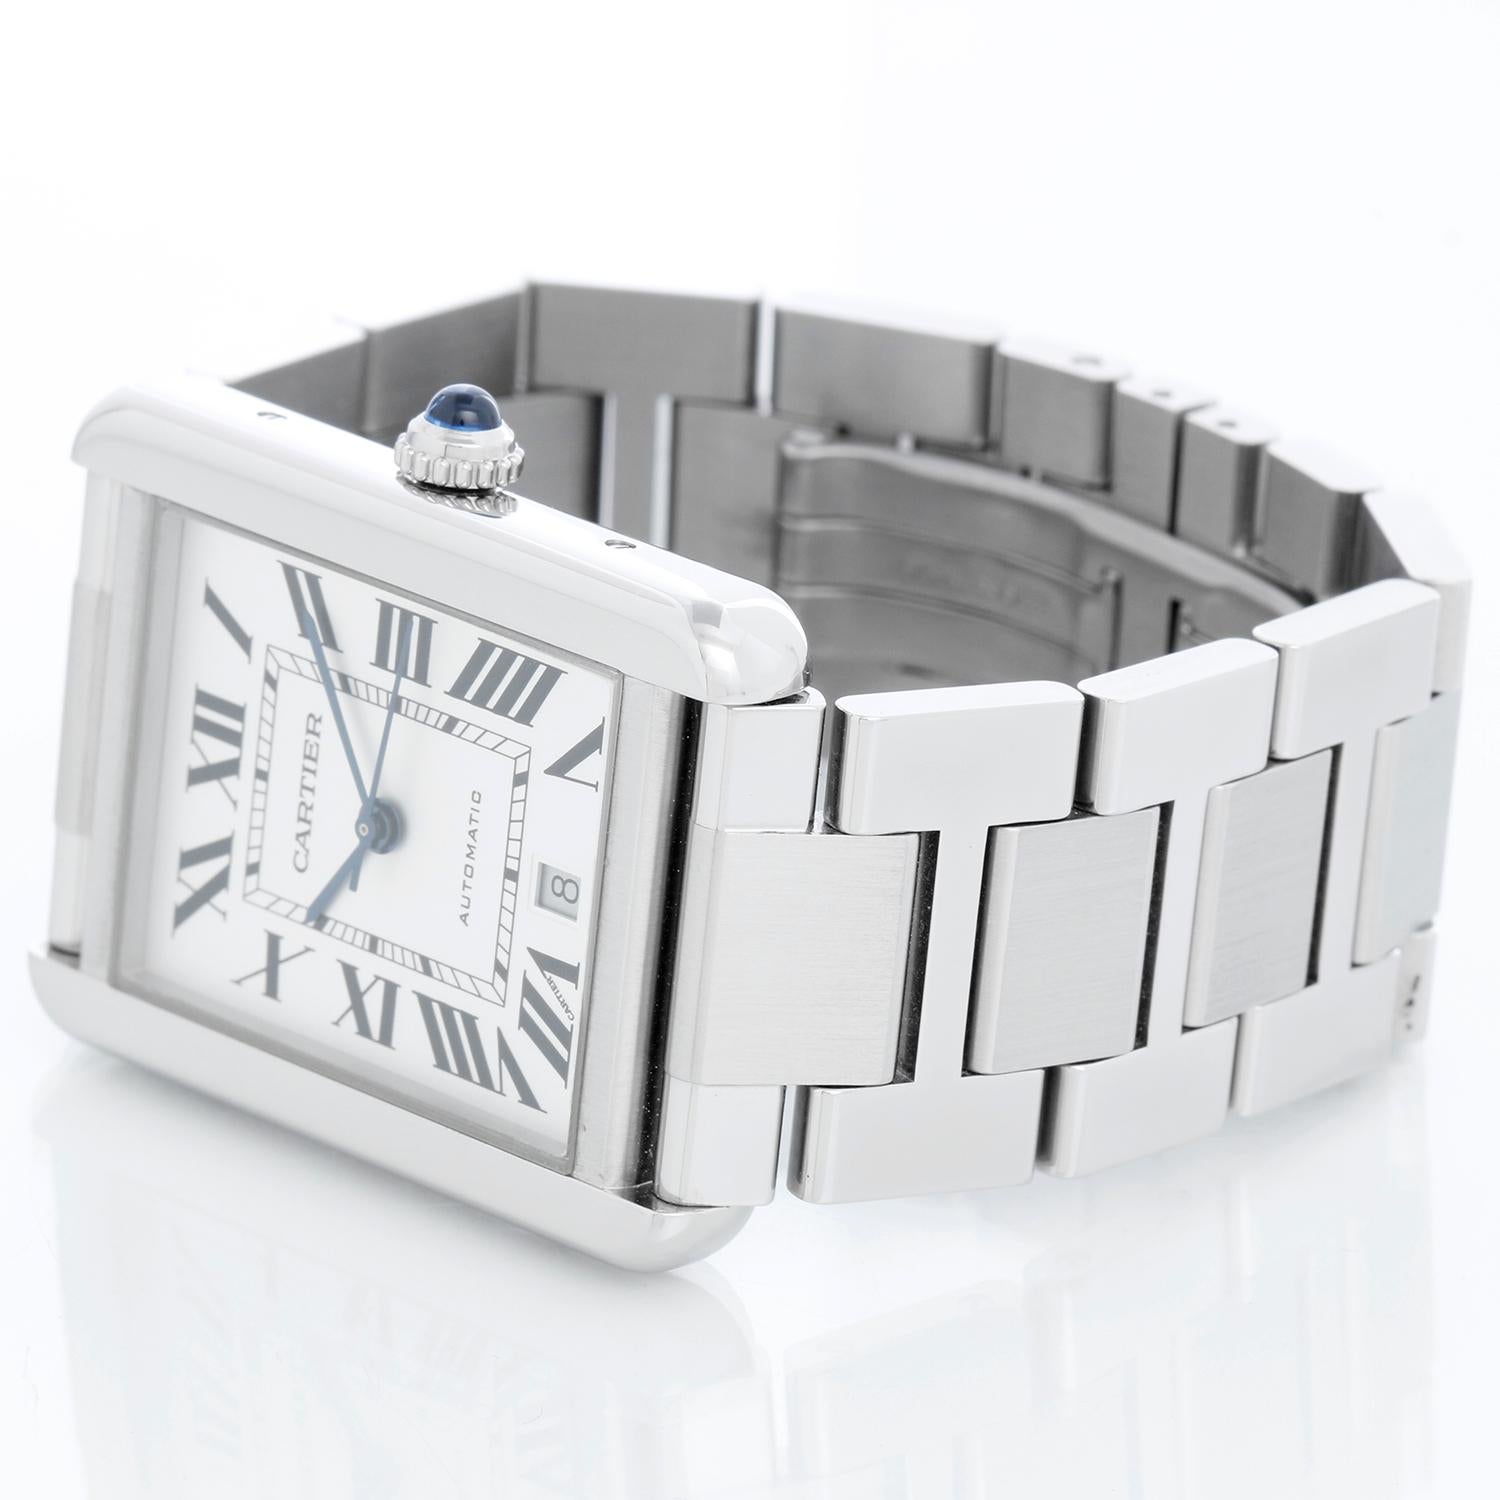 Cartier Tank Solo Stainless Steel XL W5200028 3800 - Automatic. Stainless steel  (31 x 41mm). Silver dial with black Roman numerals with date at 6 o'clock. Stainless Steel Cartier bracelet; fits 5 3/4